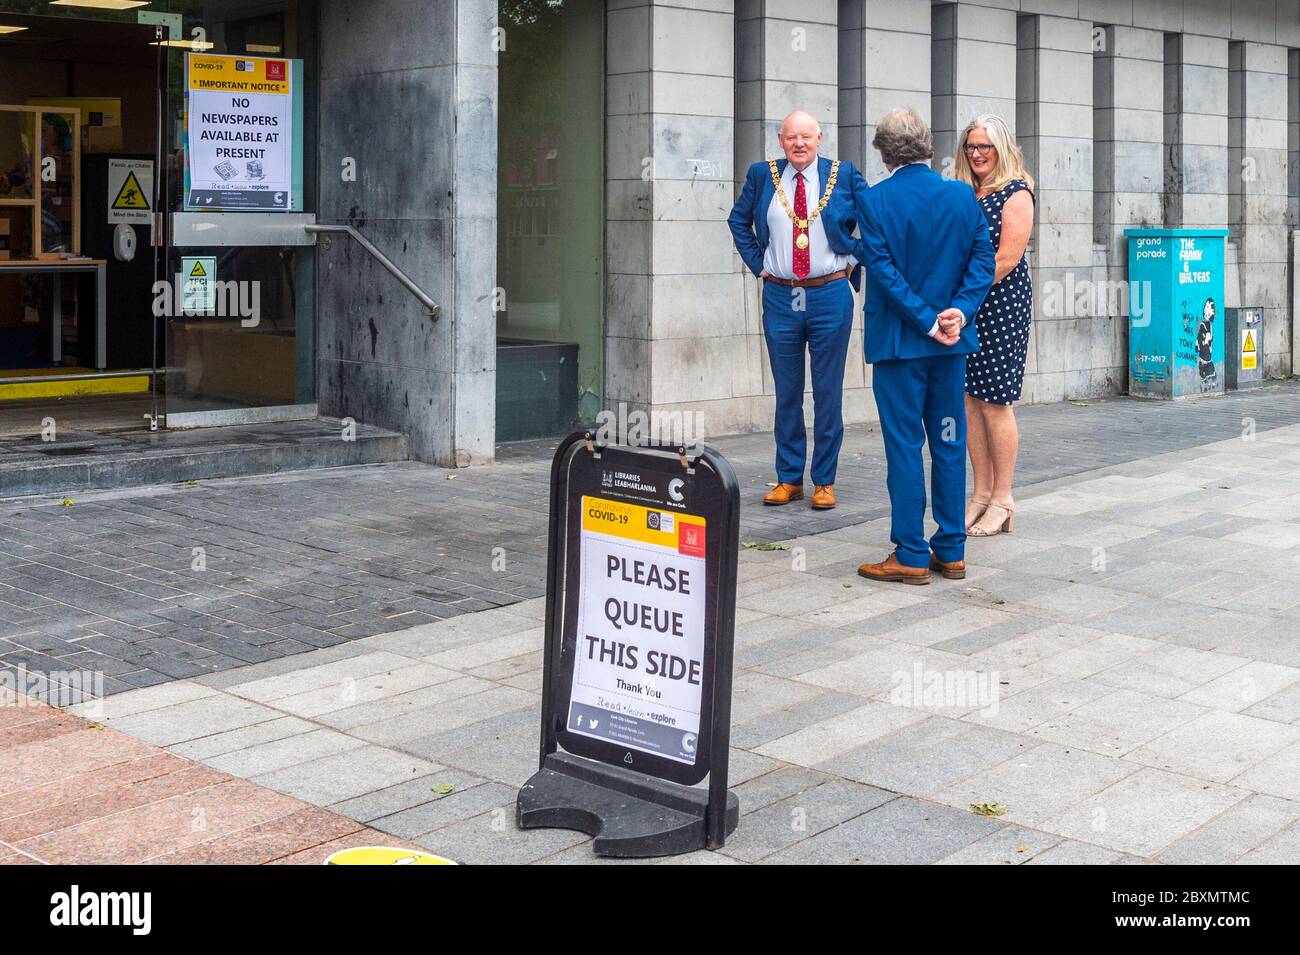 Cork, Ireland. 8th June, 2020. Many shops in Ireland are re-opening today after a 3 month closure due to the Covid-19 pandemic. Cork City Library re-opened today on a limited basis on Grand Parade, Cork. The Lord Mayor of Cork, Cllr. John Sheehan attended the re-opening. Credit: AG News/Alamy Live News Stock Photo